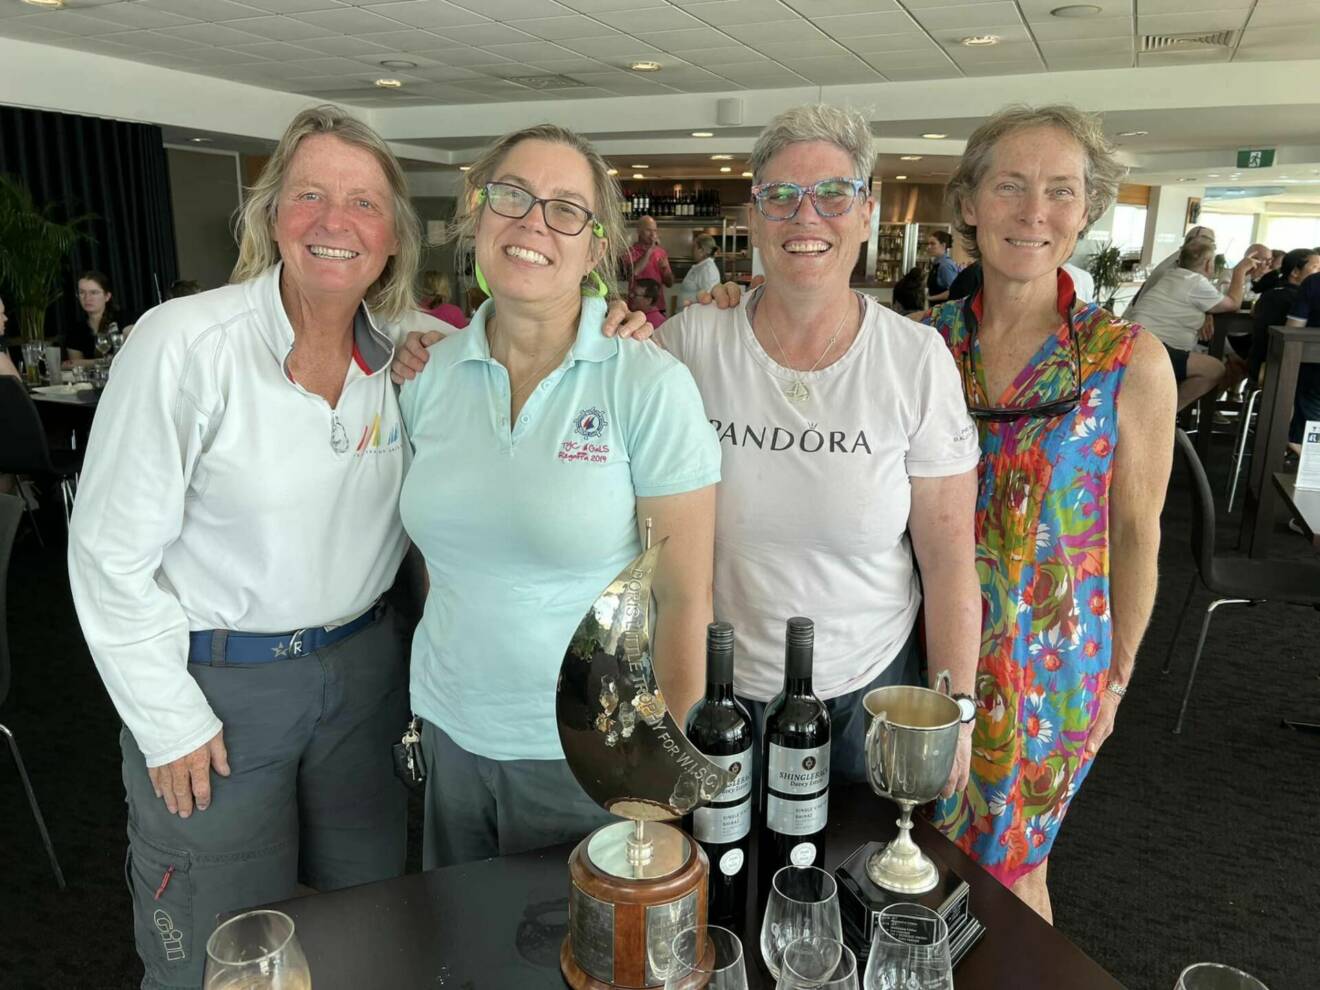 Serious Yahoo success at Women in Sailing Challenge